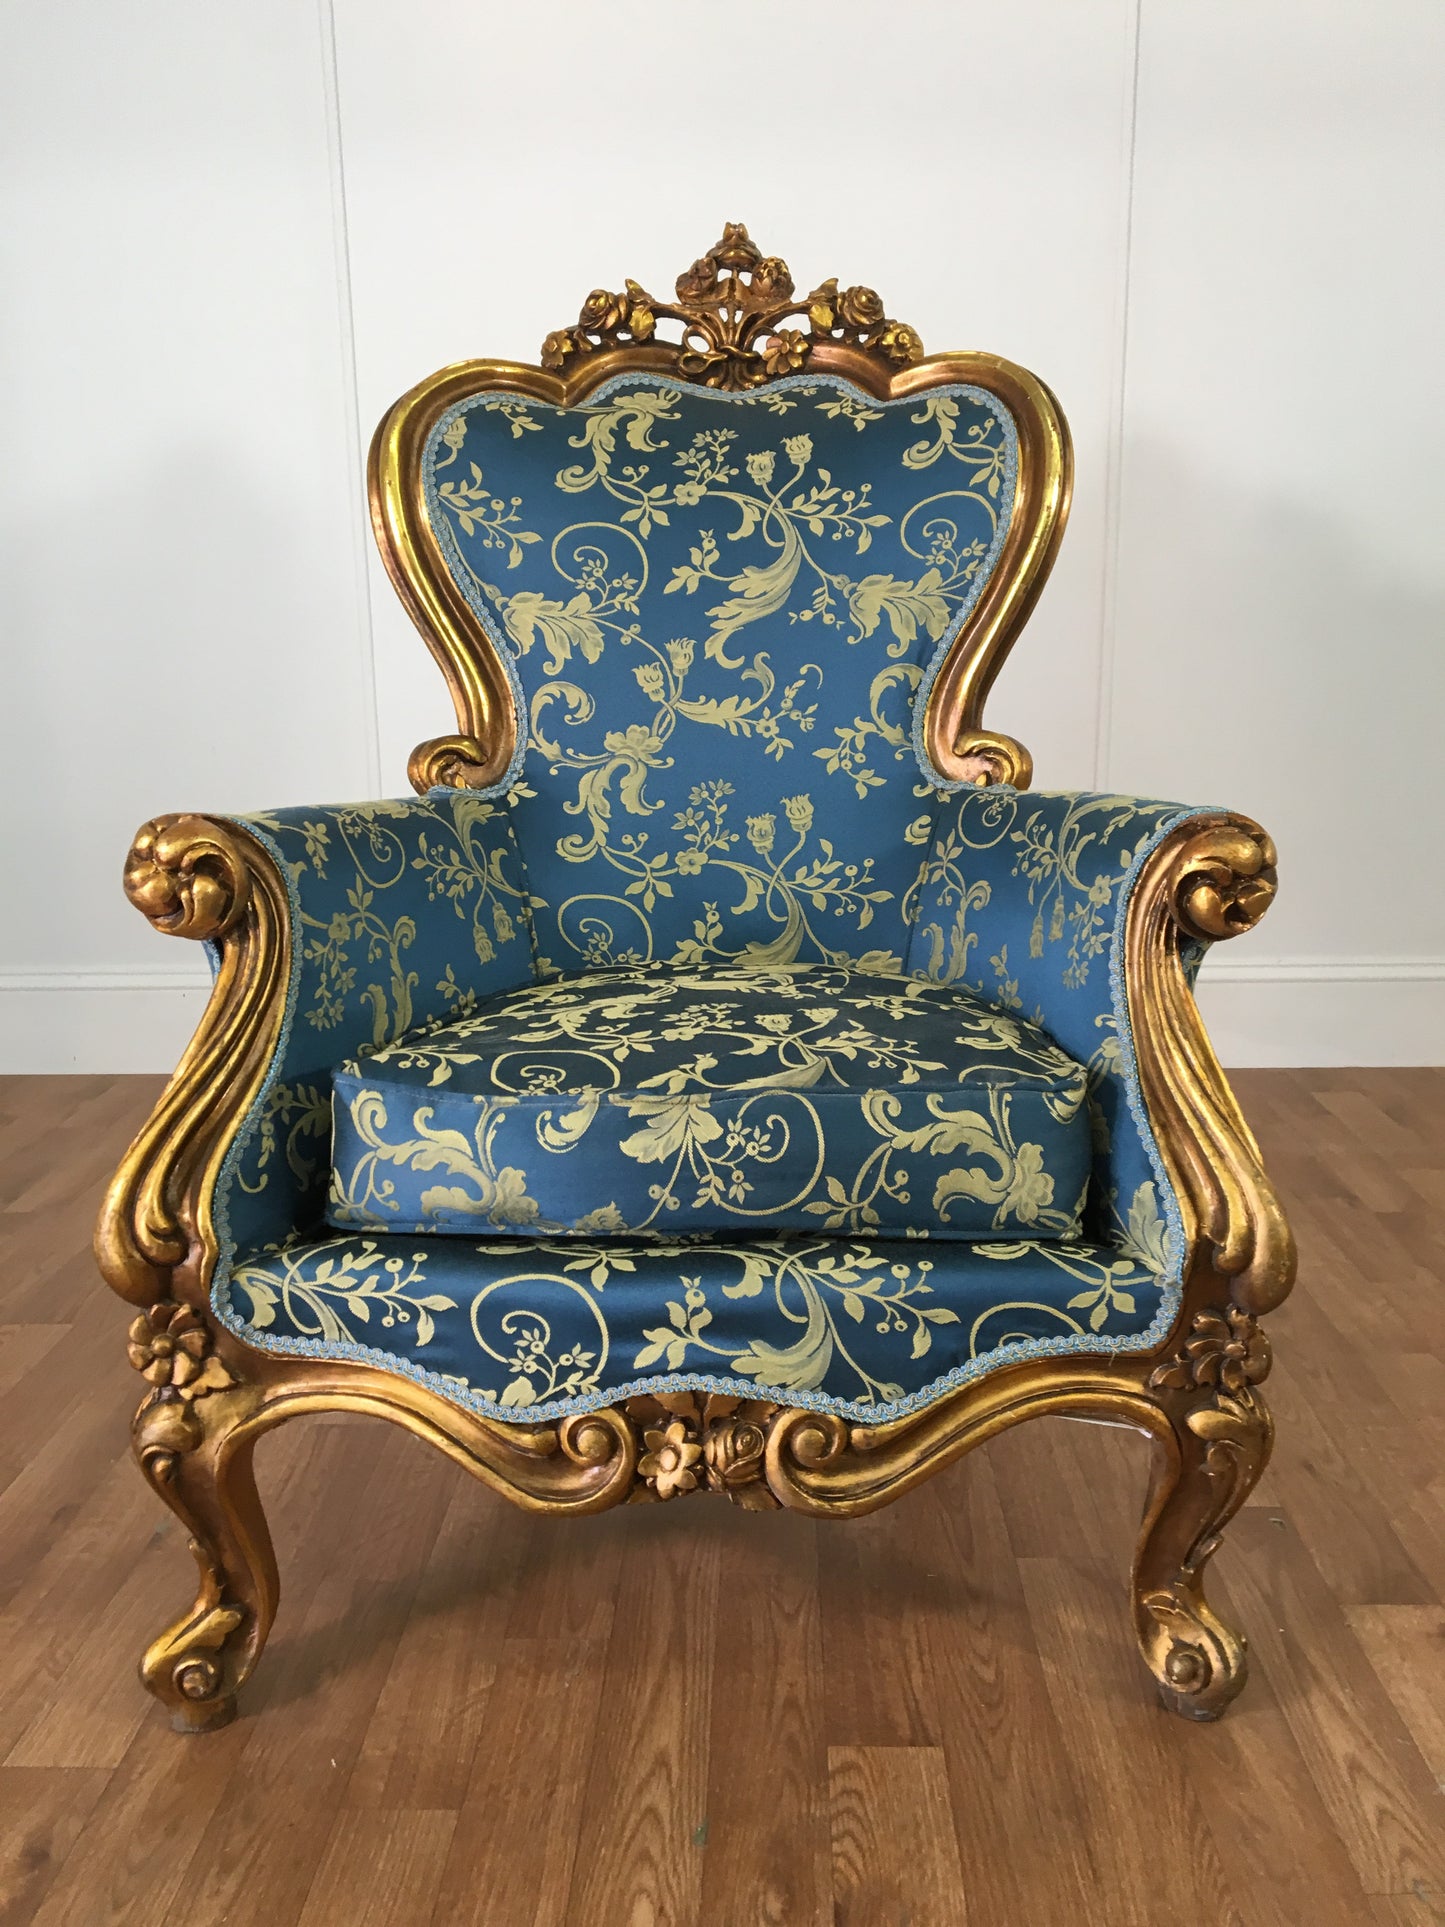 ORNATE VICTORIAN BLUE AND GOLD WINGBACK CHAIR